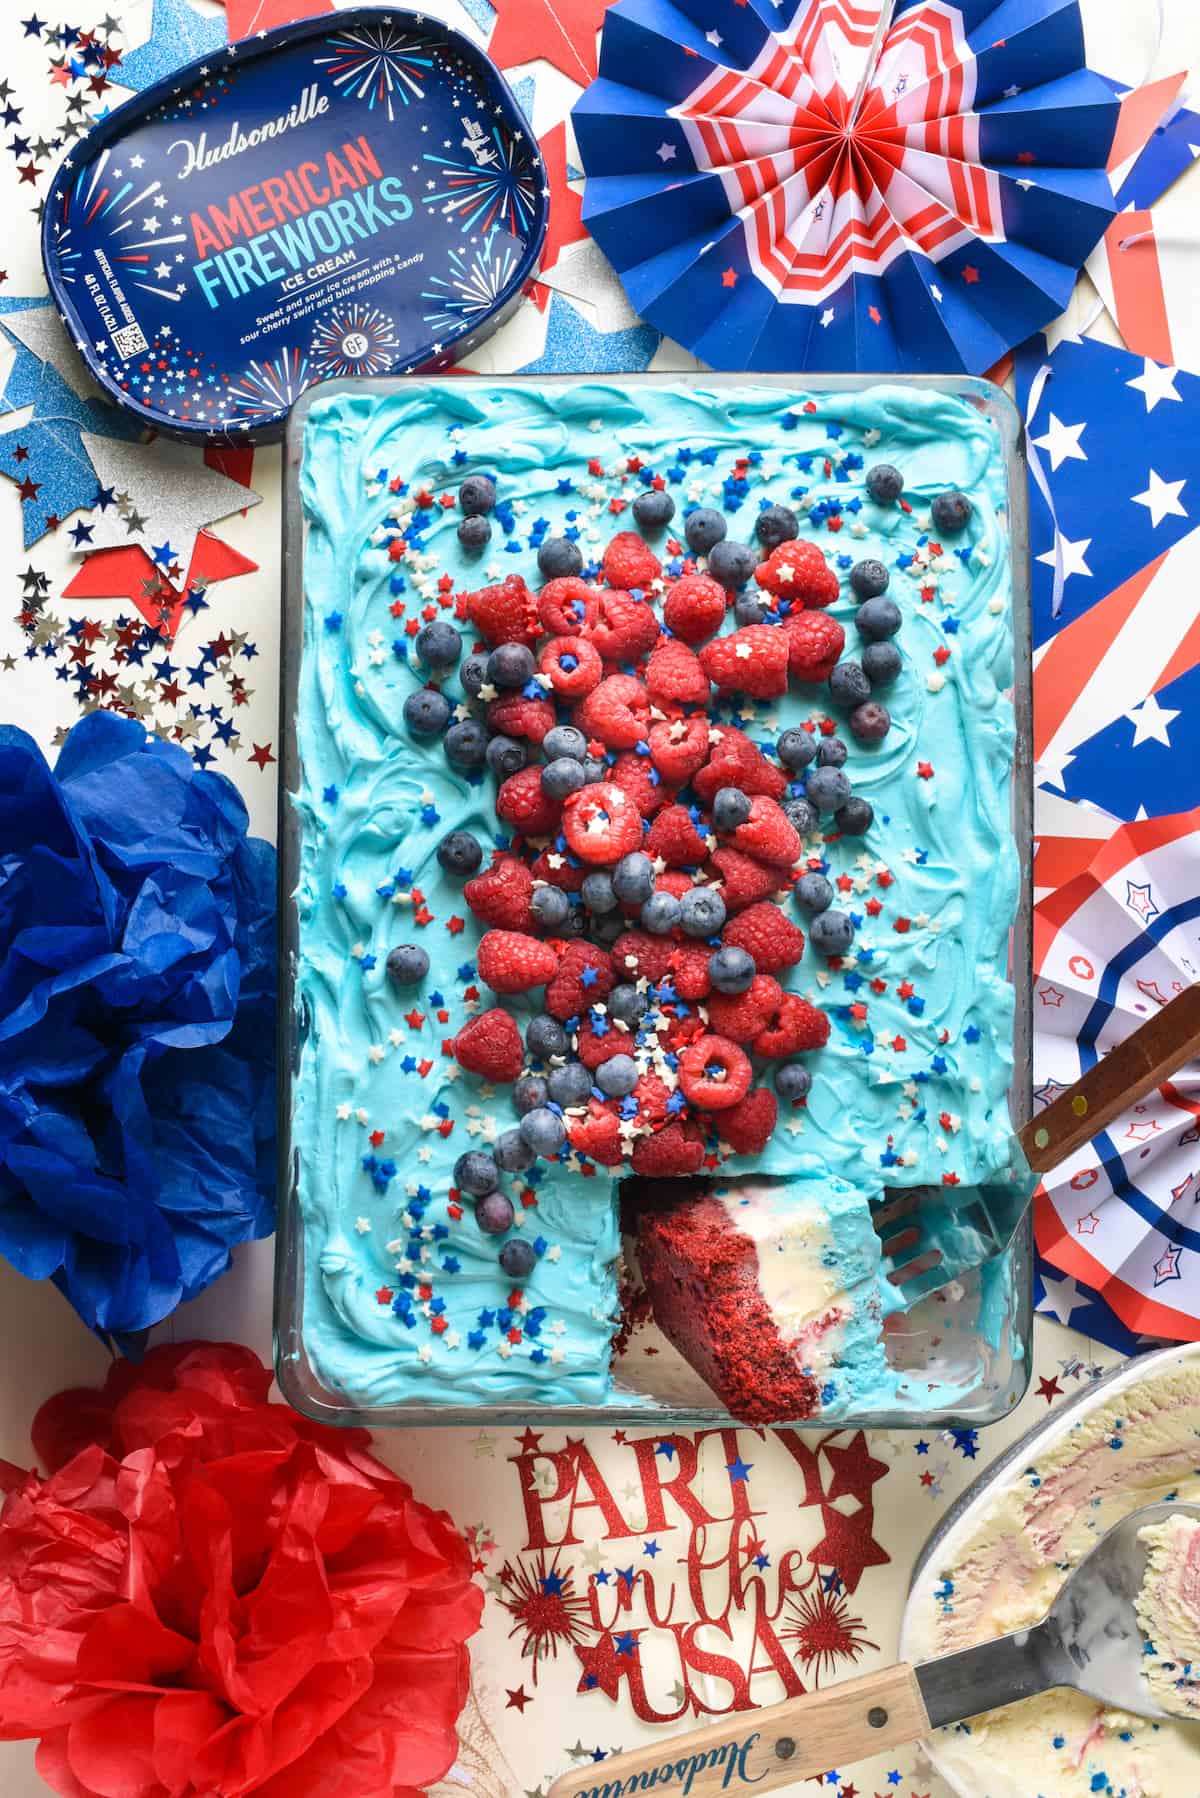 Overhead shot of red white and blue ice cream cake with one piece cut and turned. Cake is topped with berries and sprinkles.